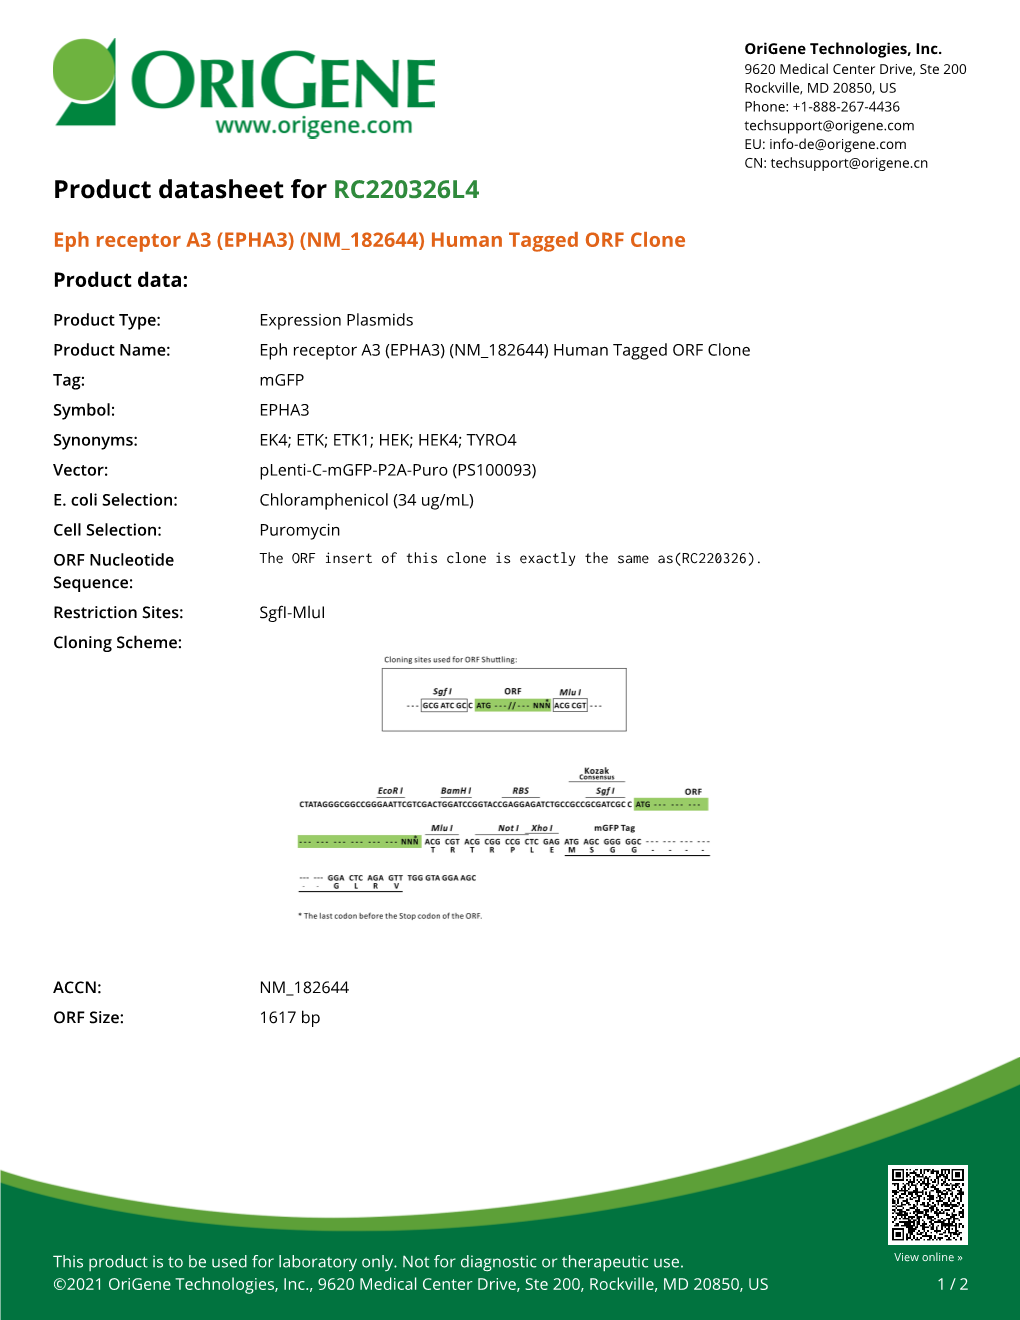 Eph Receptor A3 (EPHA3) (NM 182644) Human Tagged ORF Clone Product Data